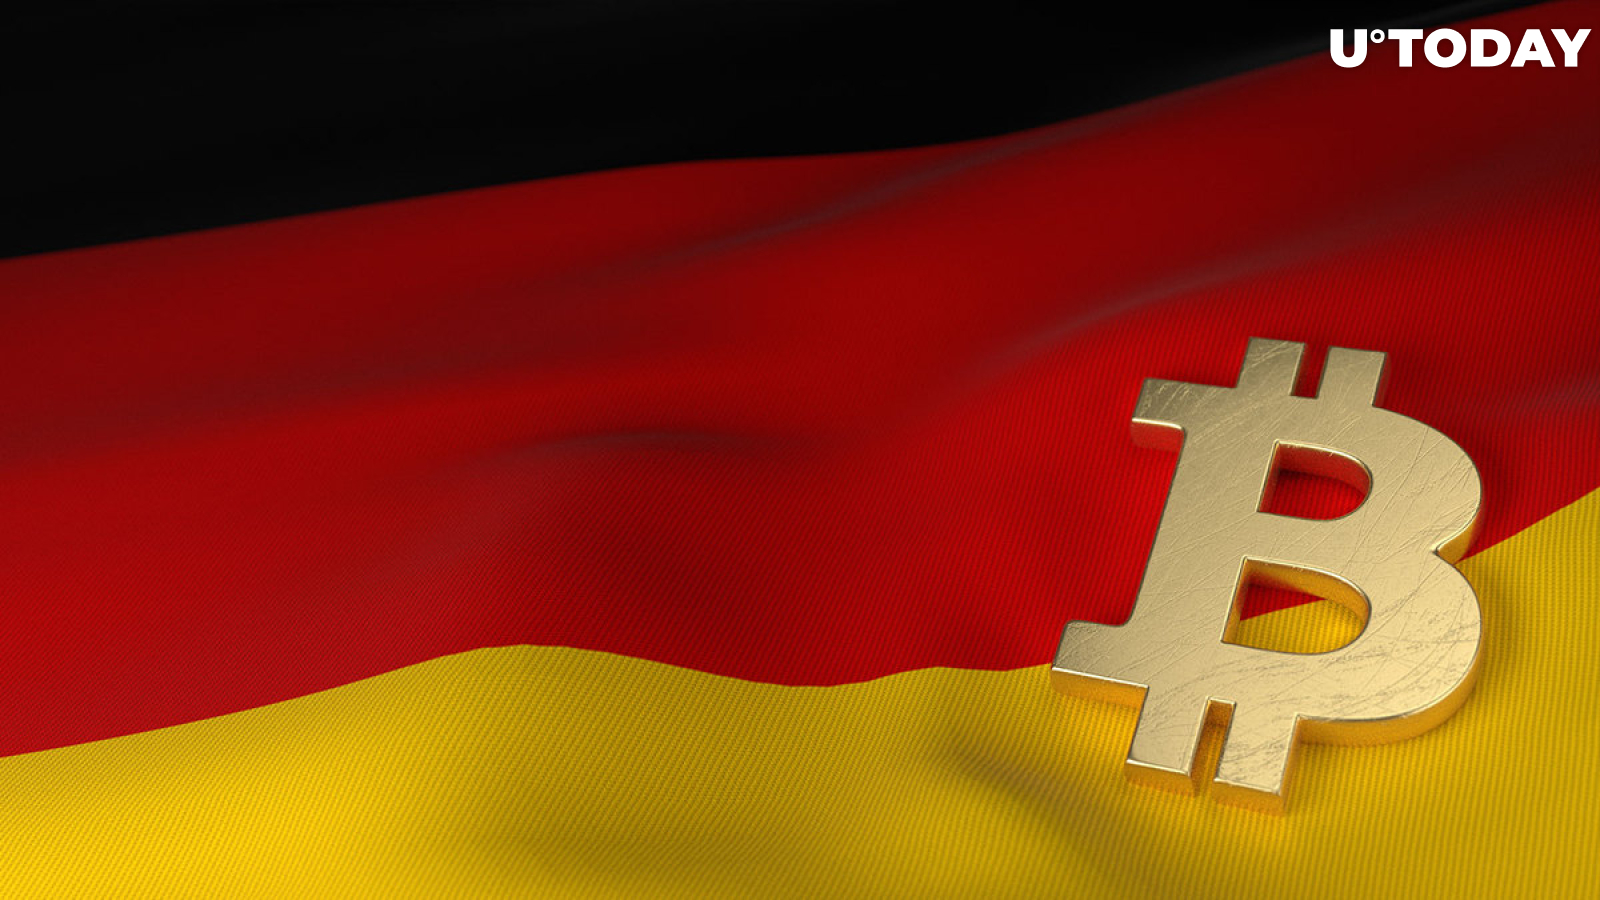 Bitcoin Nears $30,000 as BTC Gains Massive Public Exposure in Germany Through ECB: Details